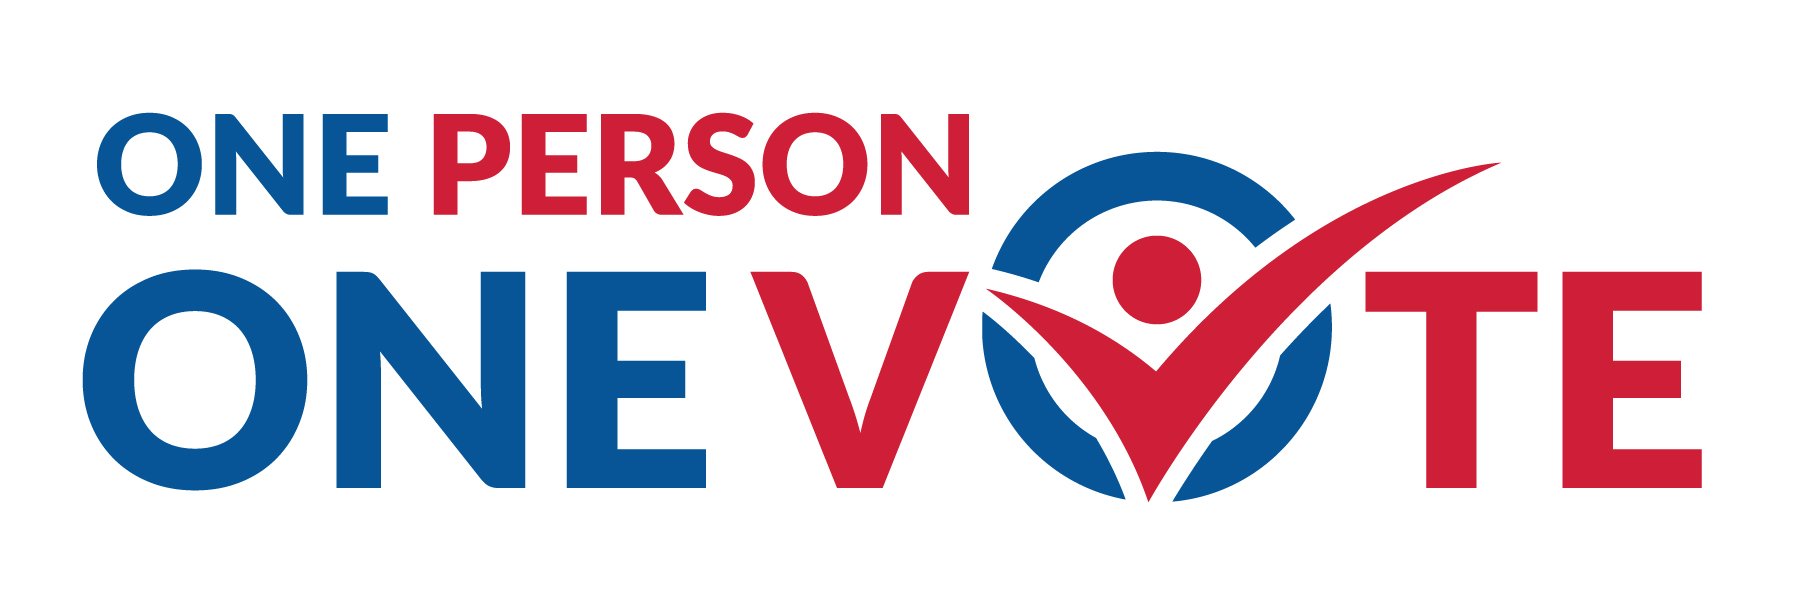 The words "one person one vote" in red and blue